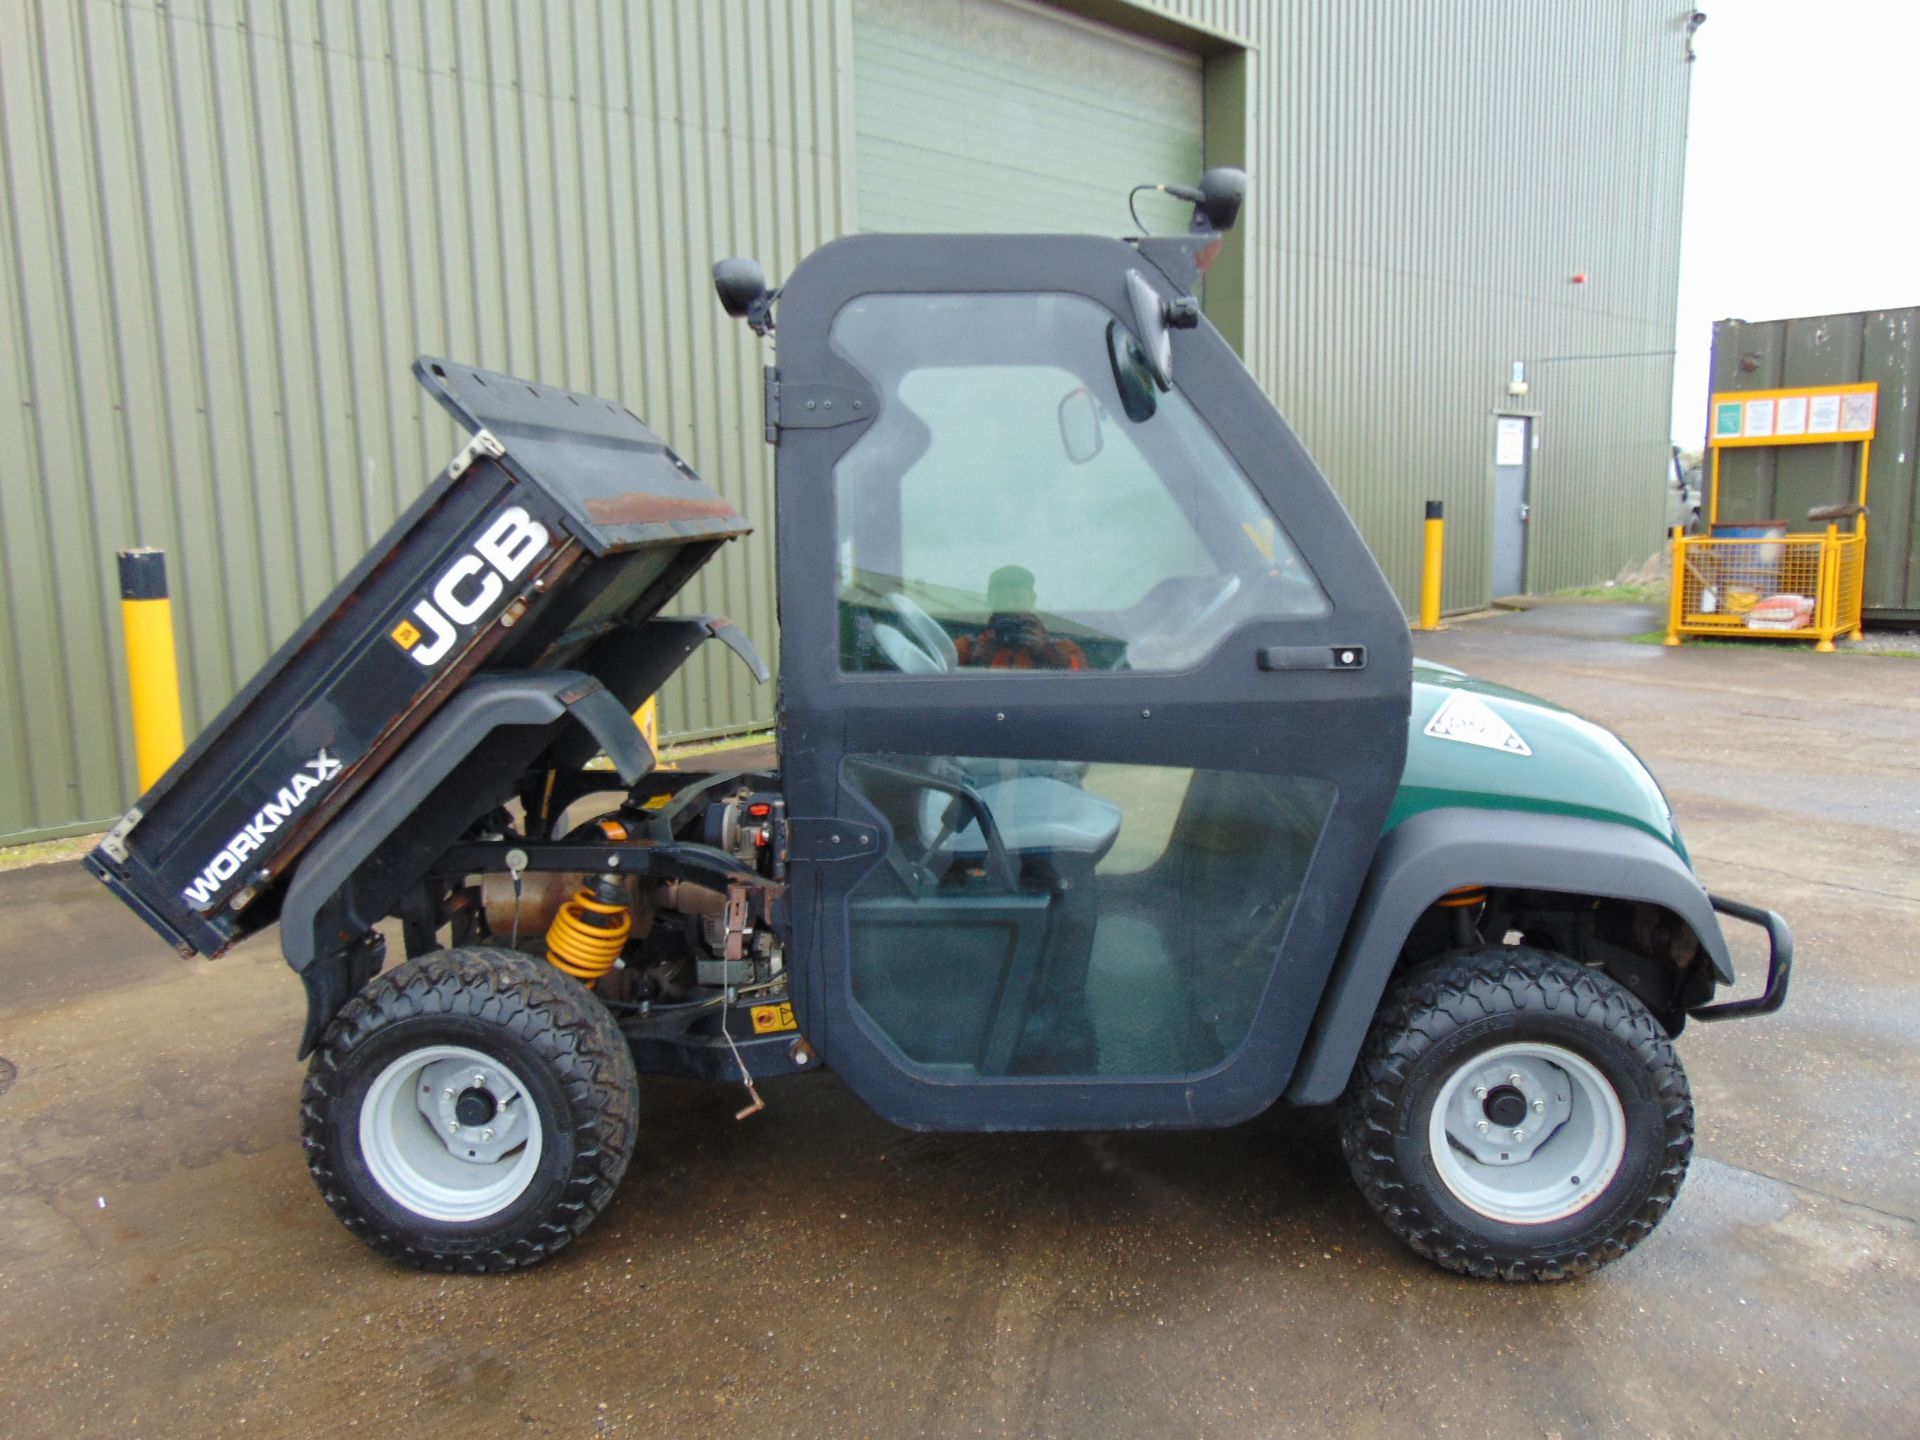 2015 JCB Workmax 1000D 4WD Diesel Utility Vehicle UTV ONLY 746 HOURS! - Image 13 of 15